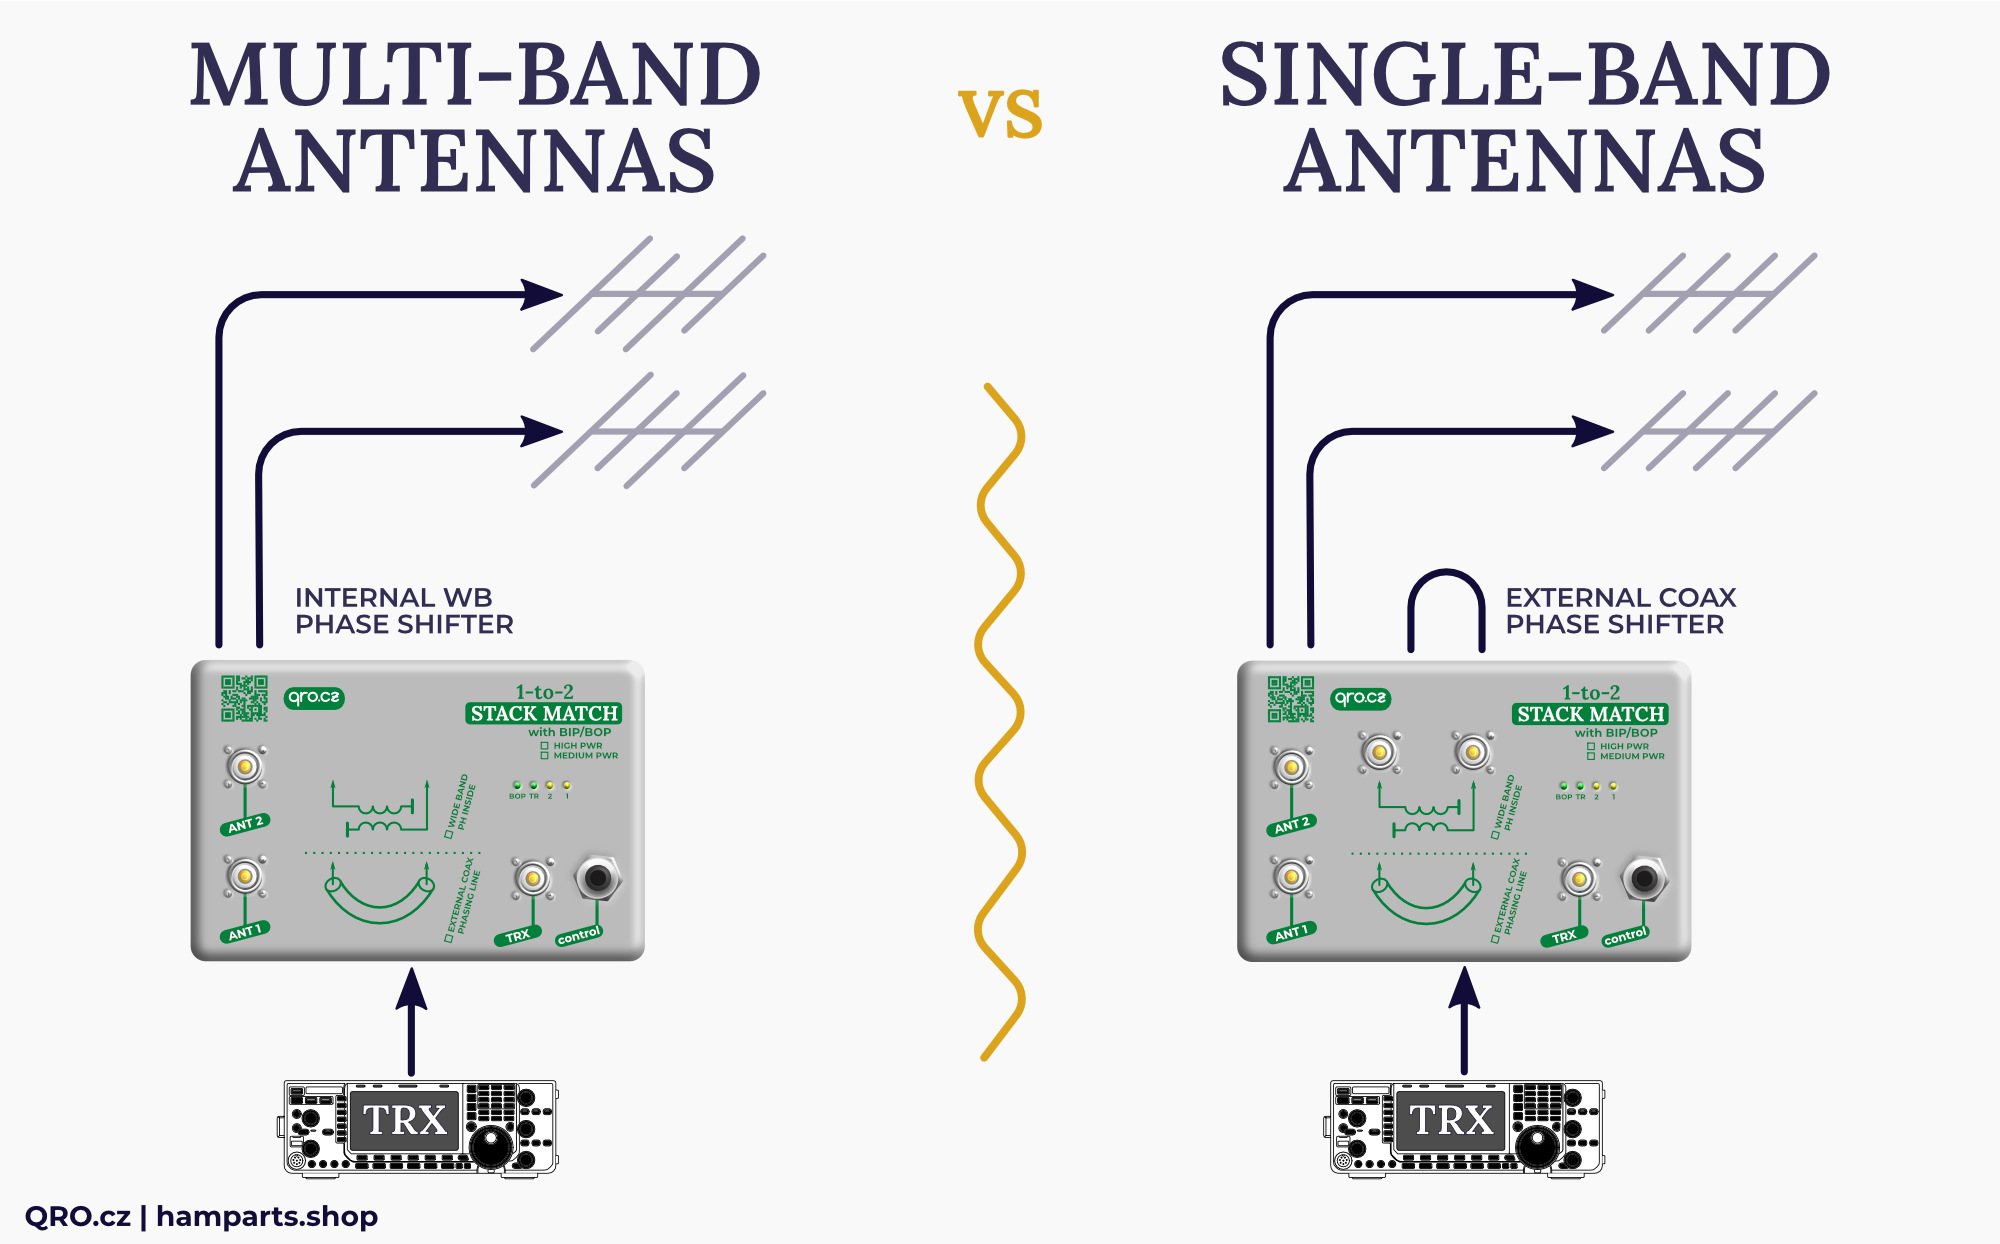 stack match 1-2 multi band versus single band antennas by qro.cz hamparts.shop